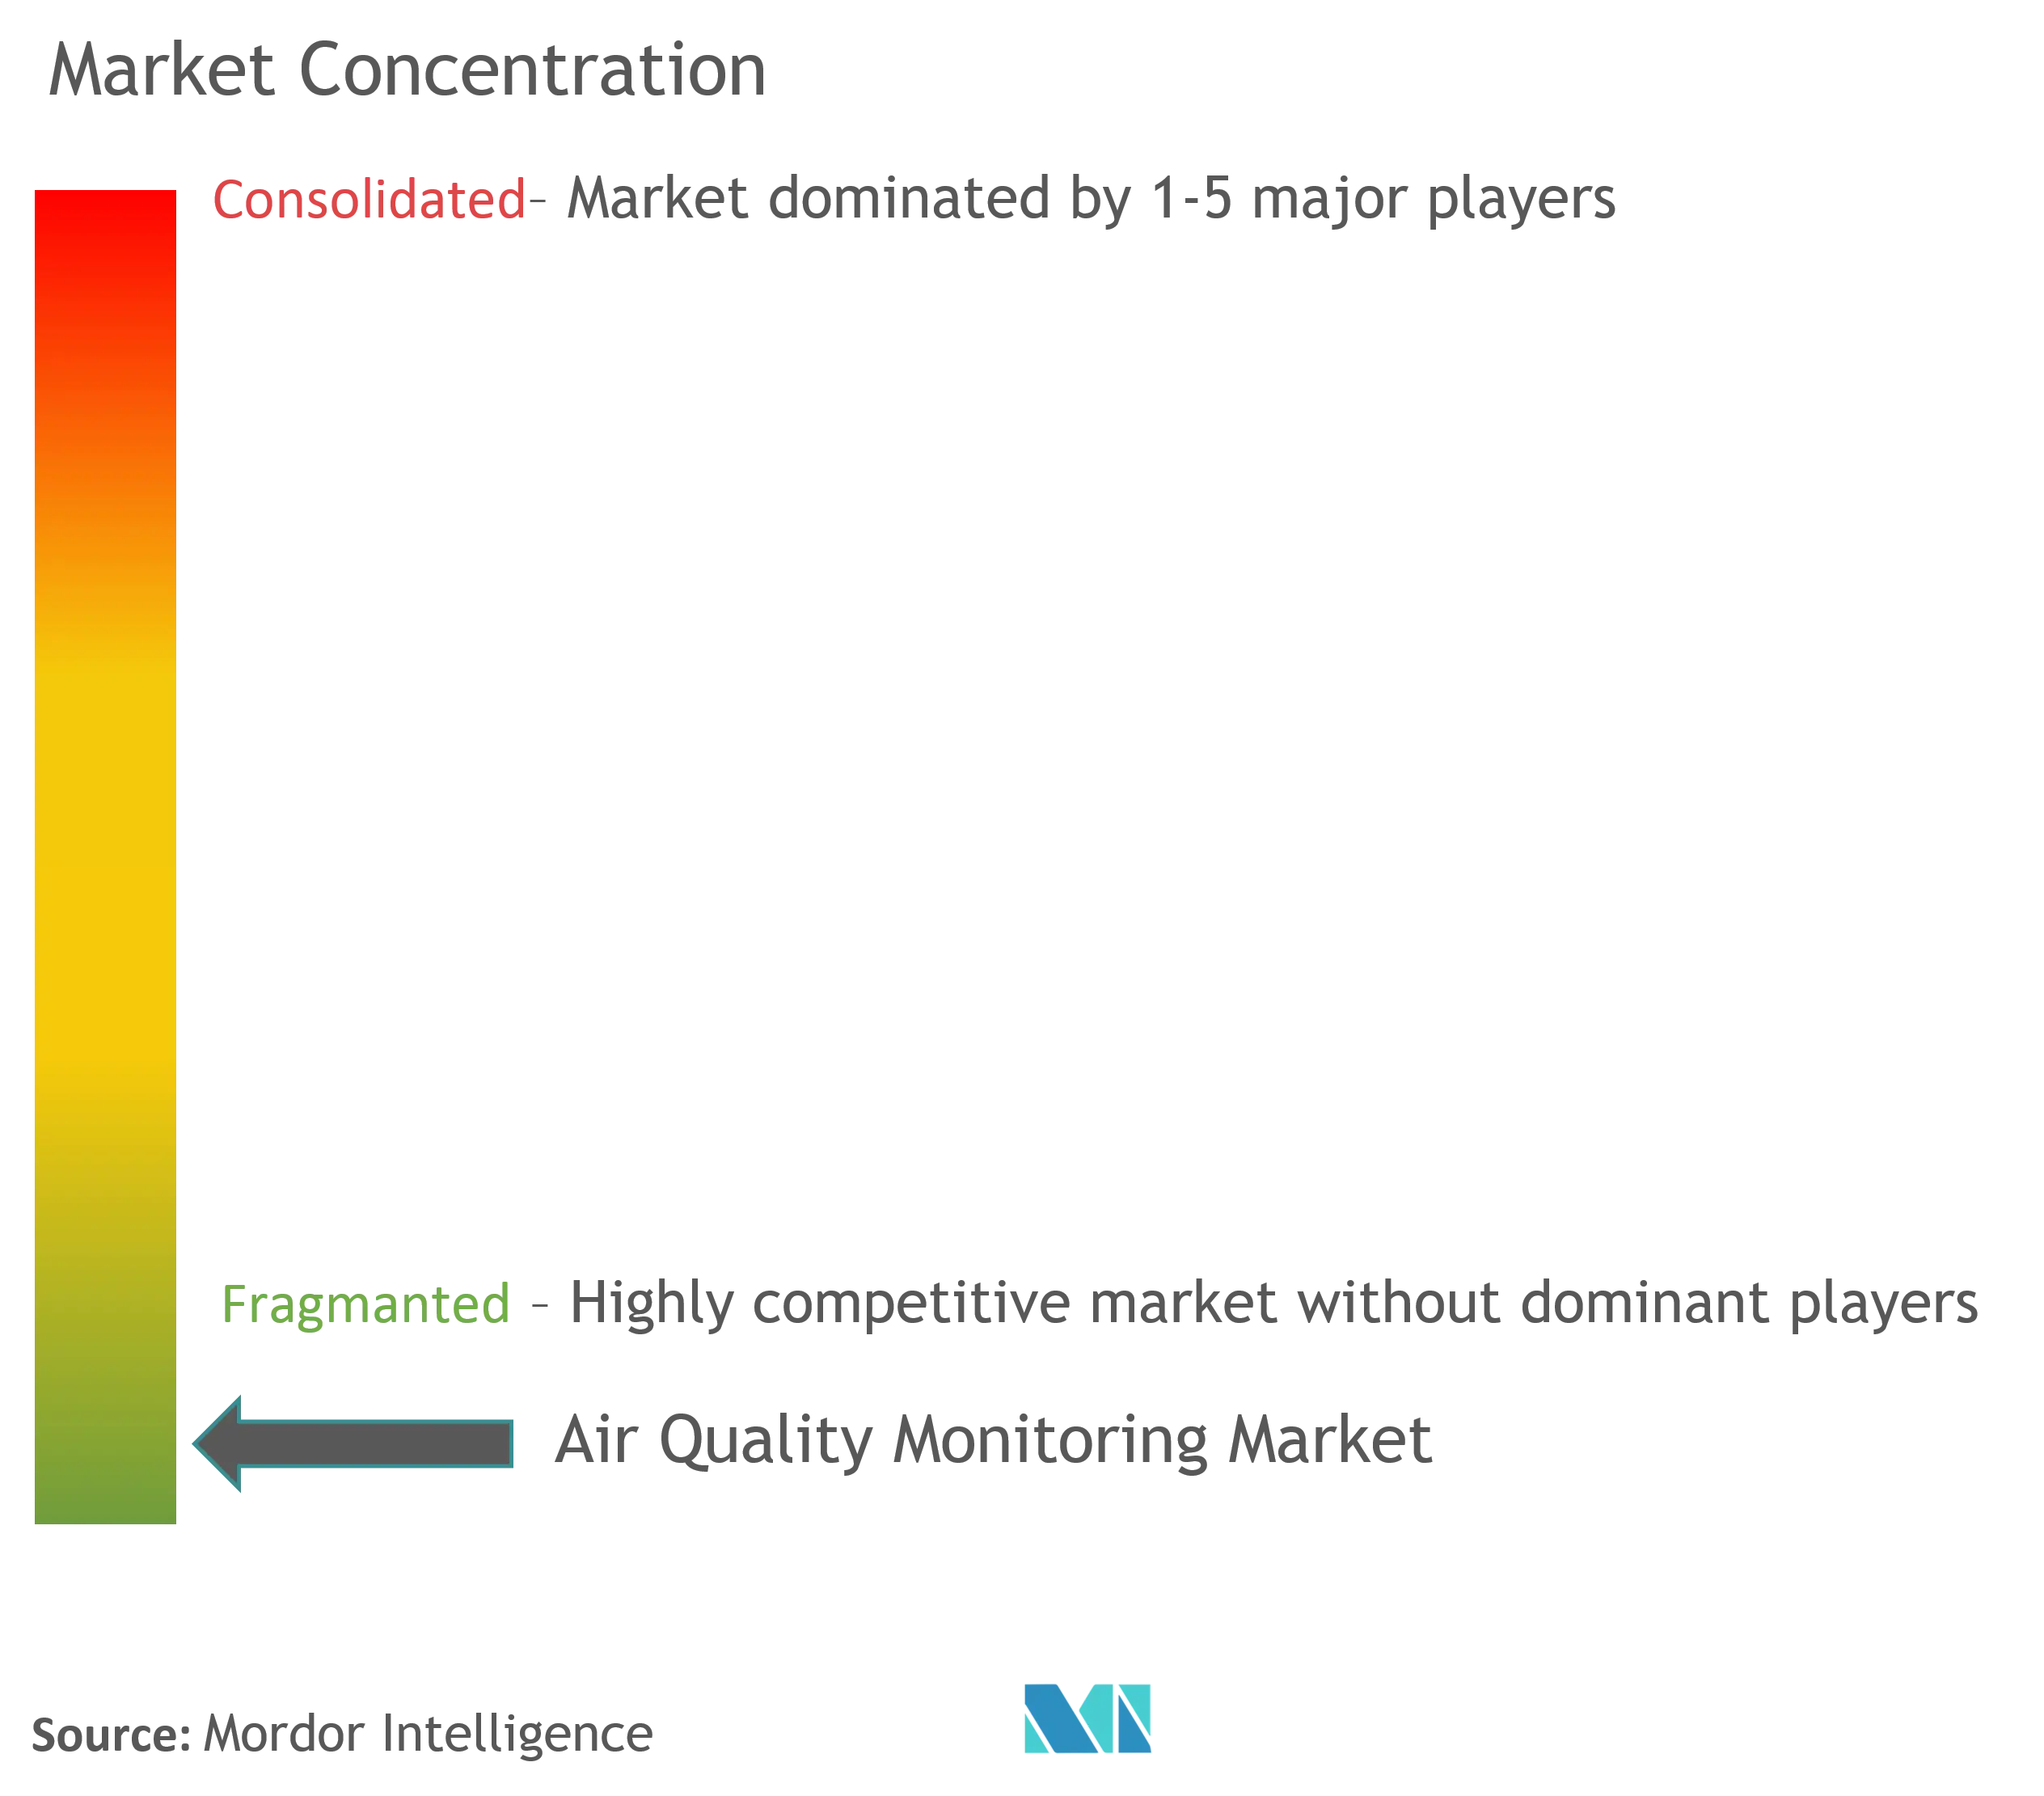 Air Quality Monitoring Market Concentration